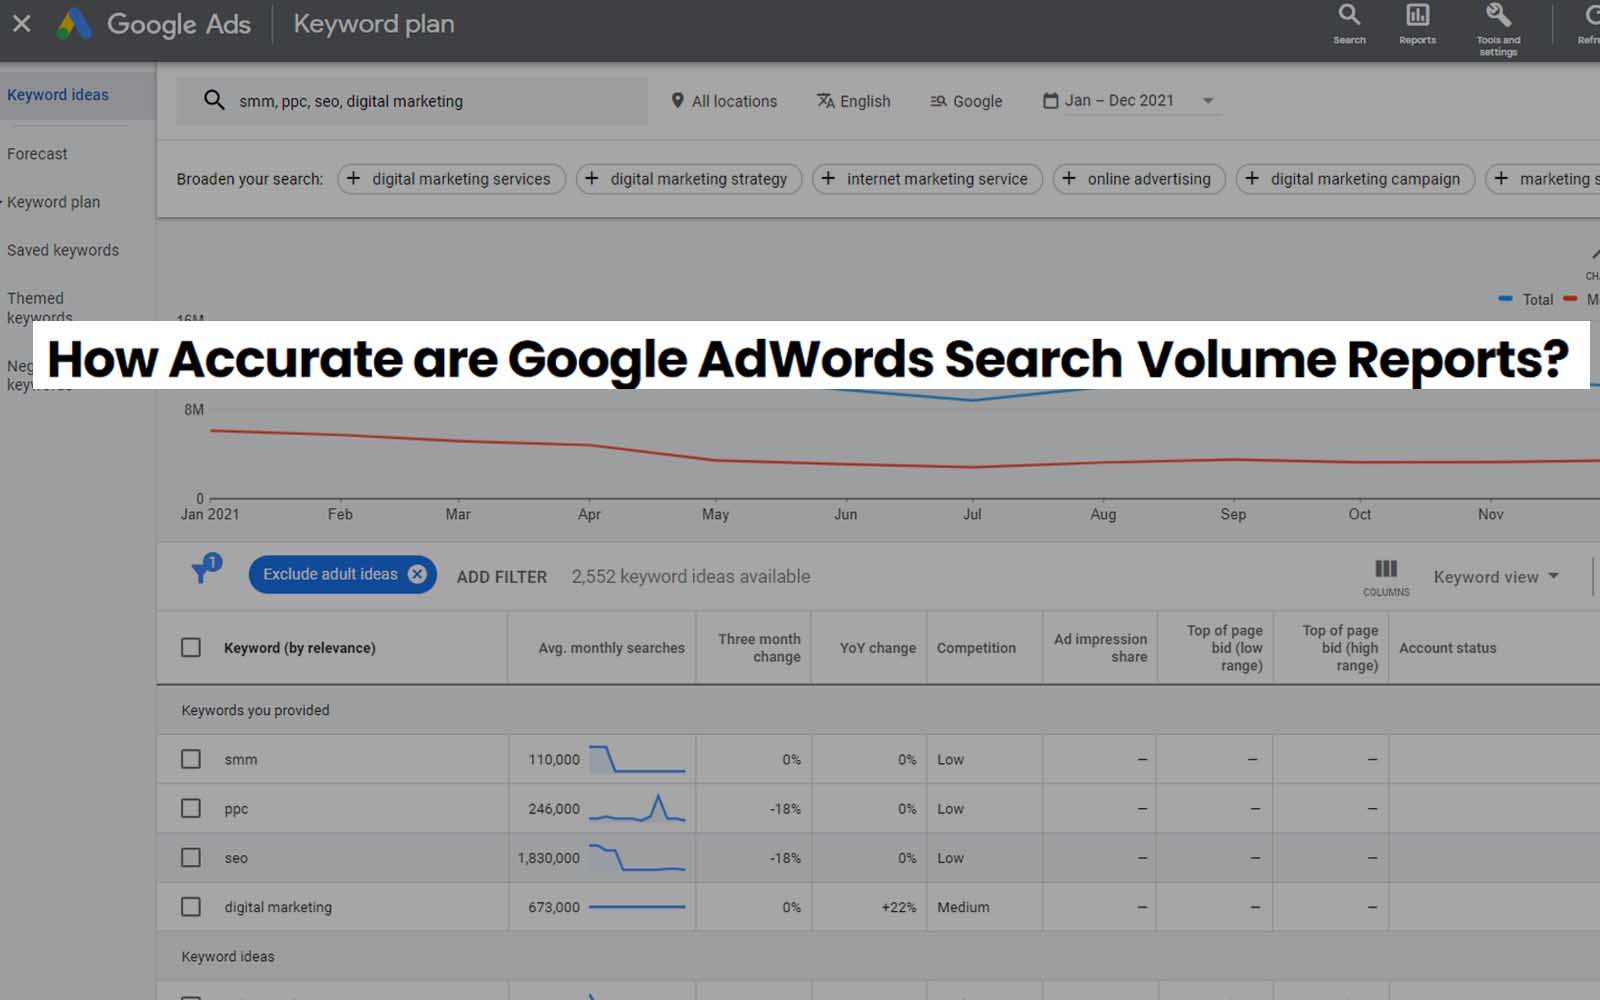 How Accurate are Google AdWords Search Volume Reports?